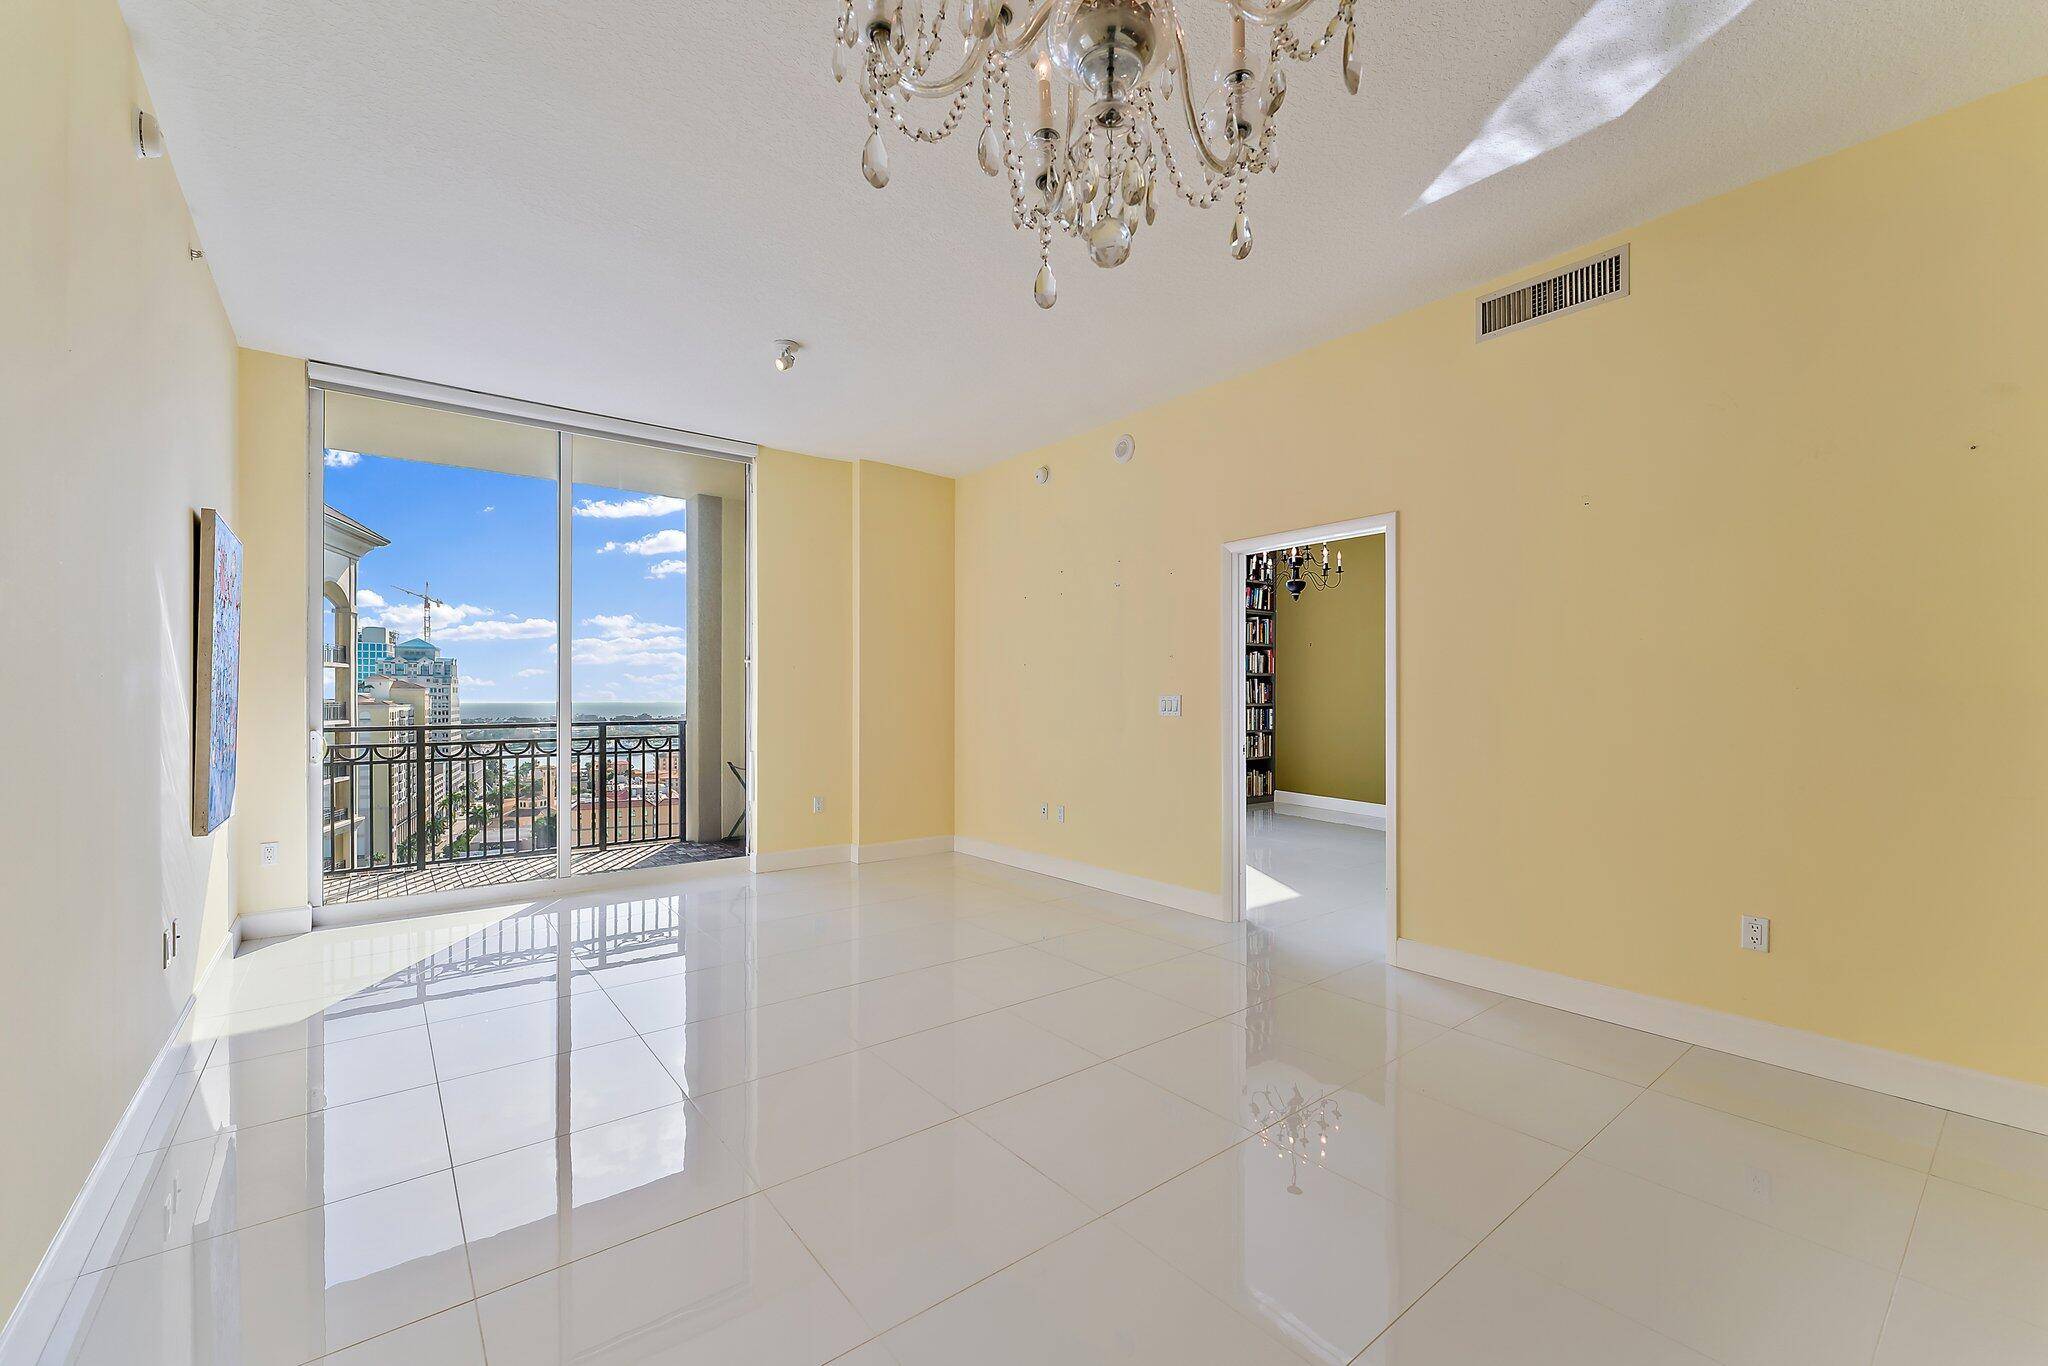 This east facing condo in West Palm Beach offers panoramic views of the intracoastal, Palm Beach, and the ocean.